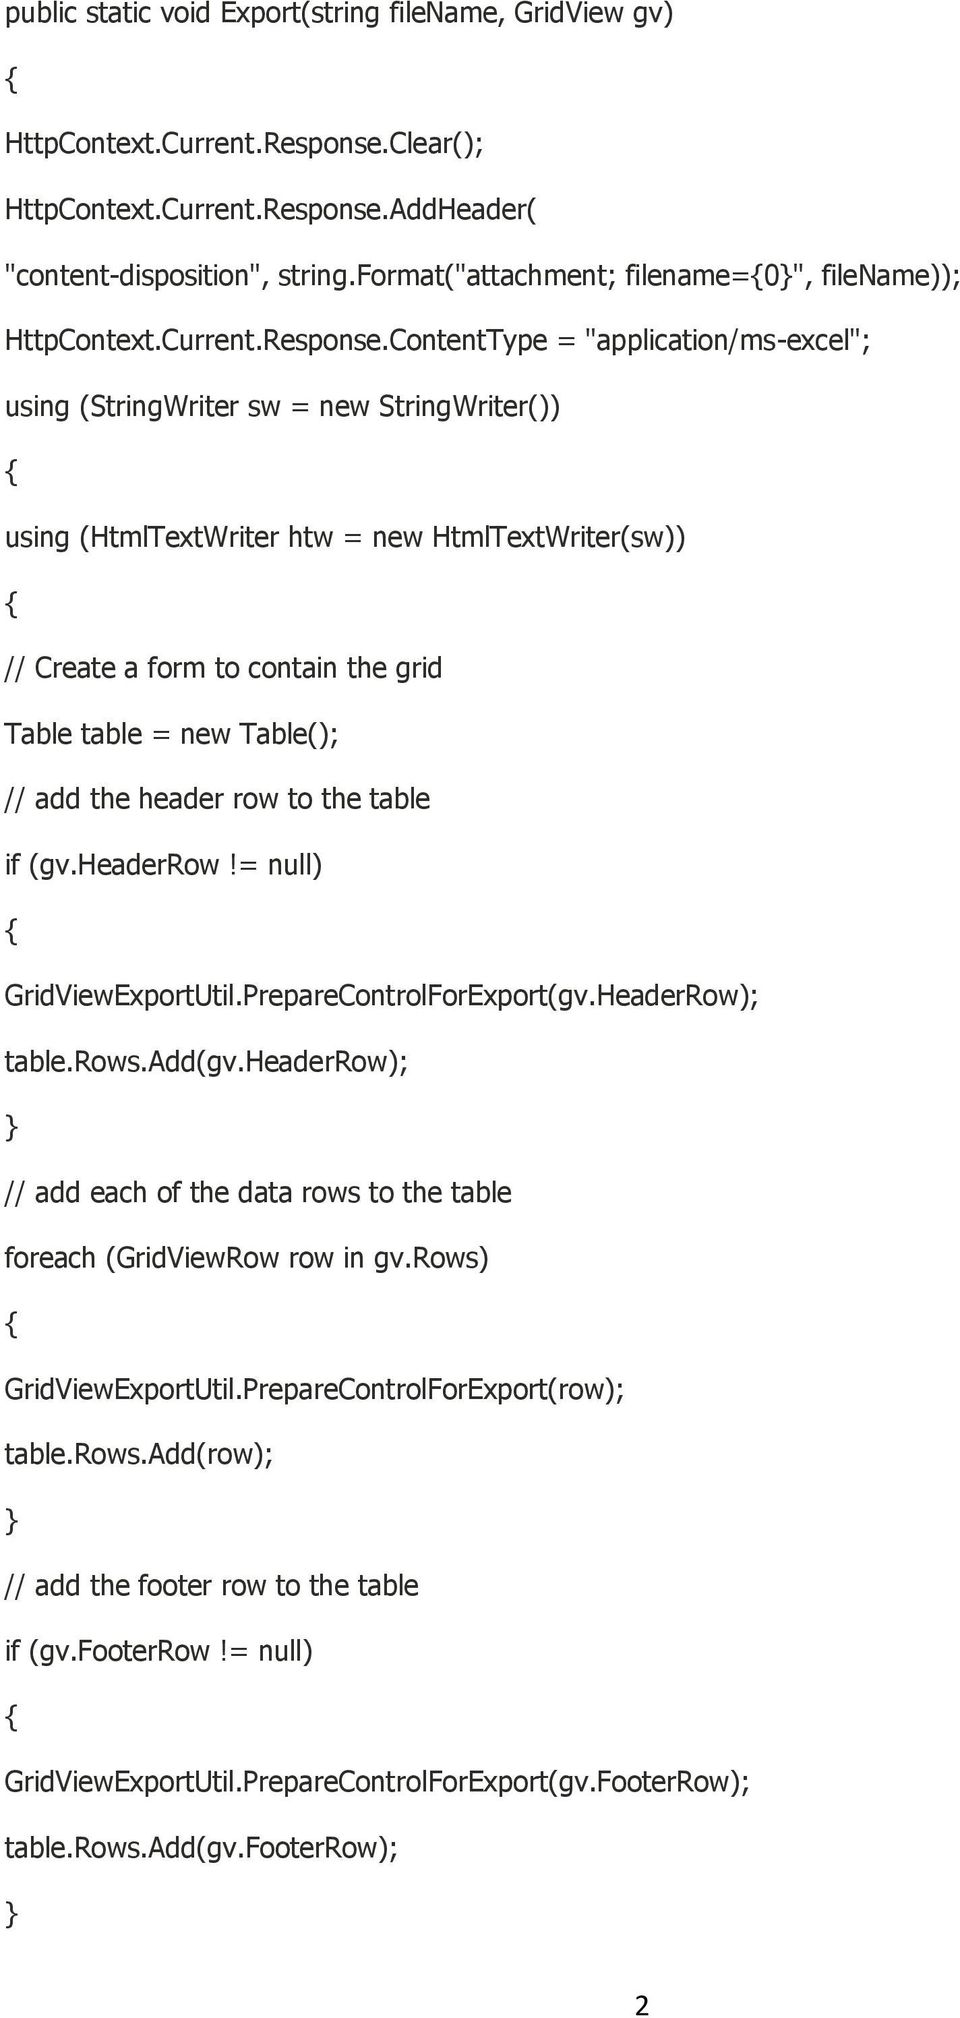 ContentType = "application/ms-excel"; using (StringWriter sw = new StringWriter()) using (HtmlTextWriter htw = new HtmlTextWriter(sw)) // Create a form to contain the grid Table table = new Table();